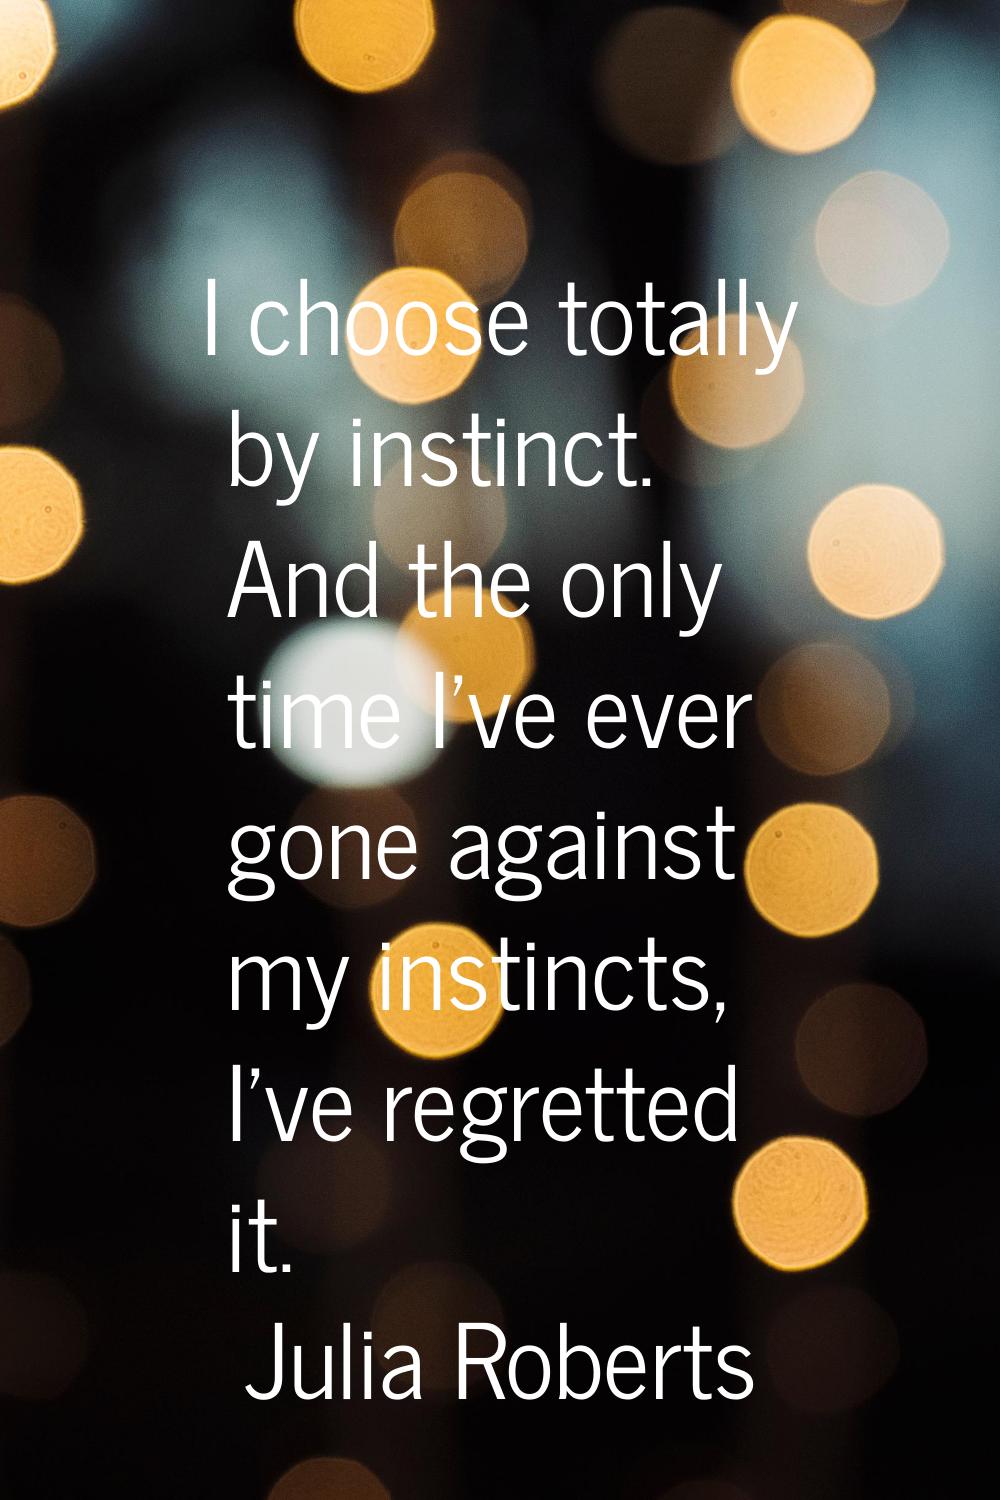 I choose totally by instinct. And the only time I've ever gone against my instincts, I've regretted